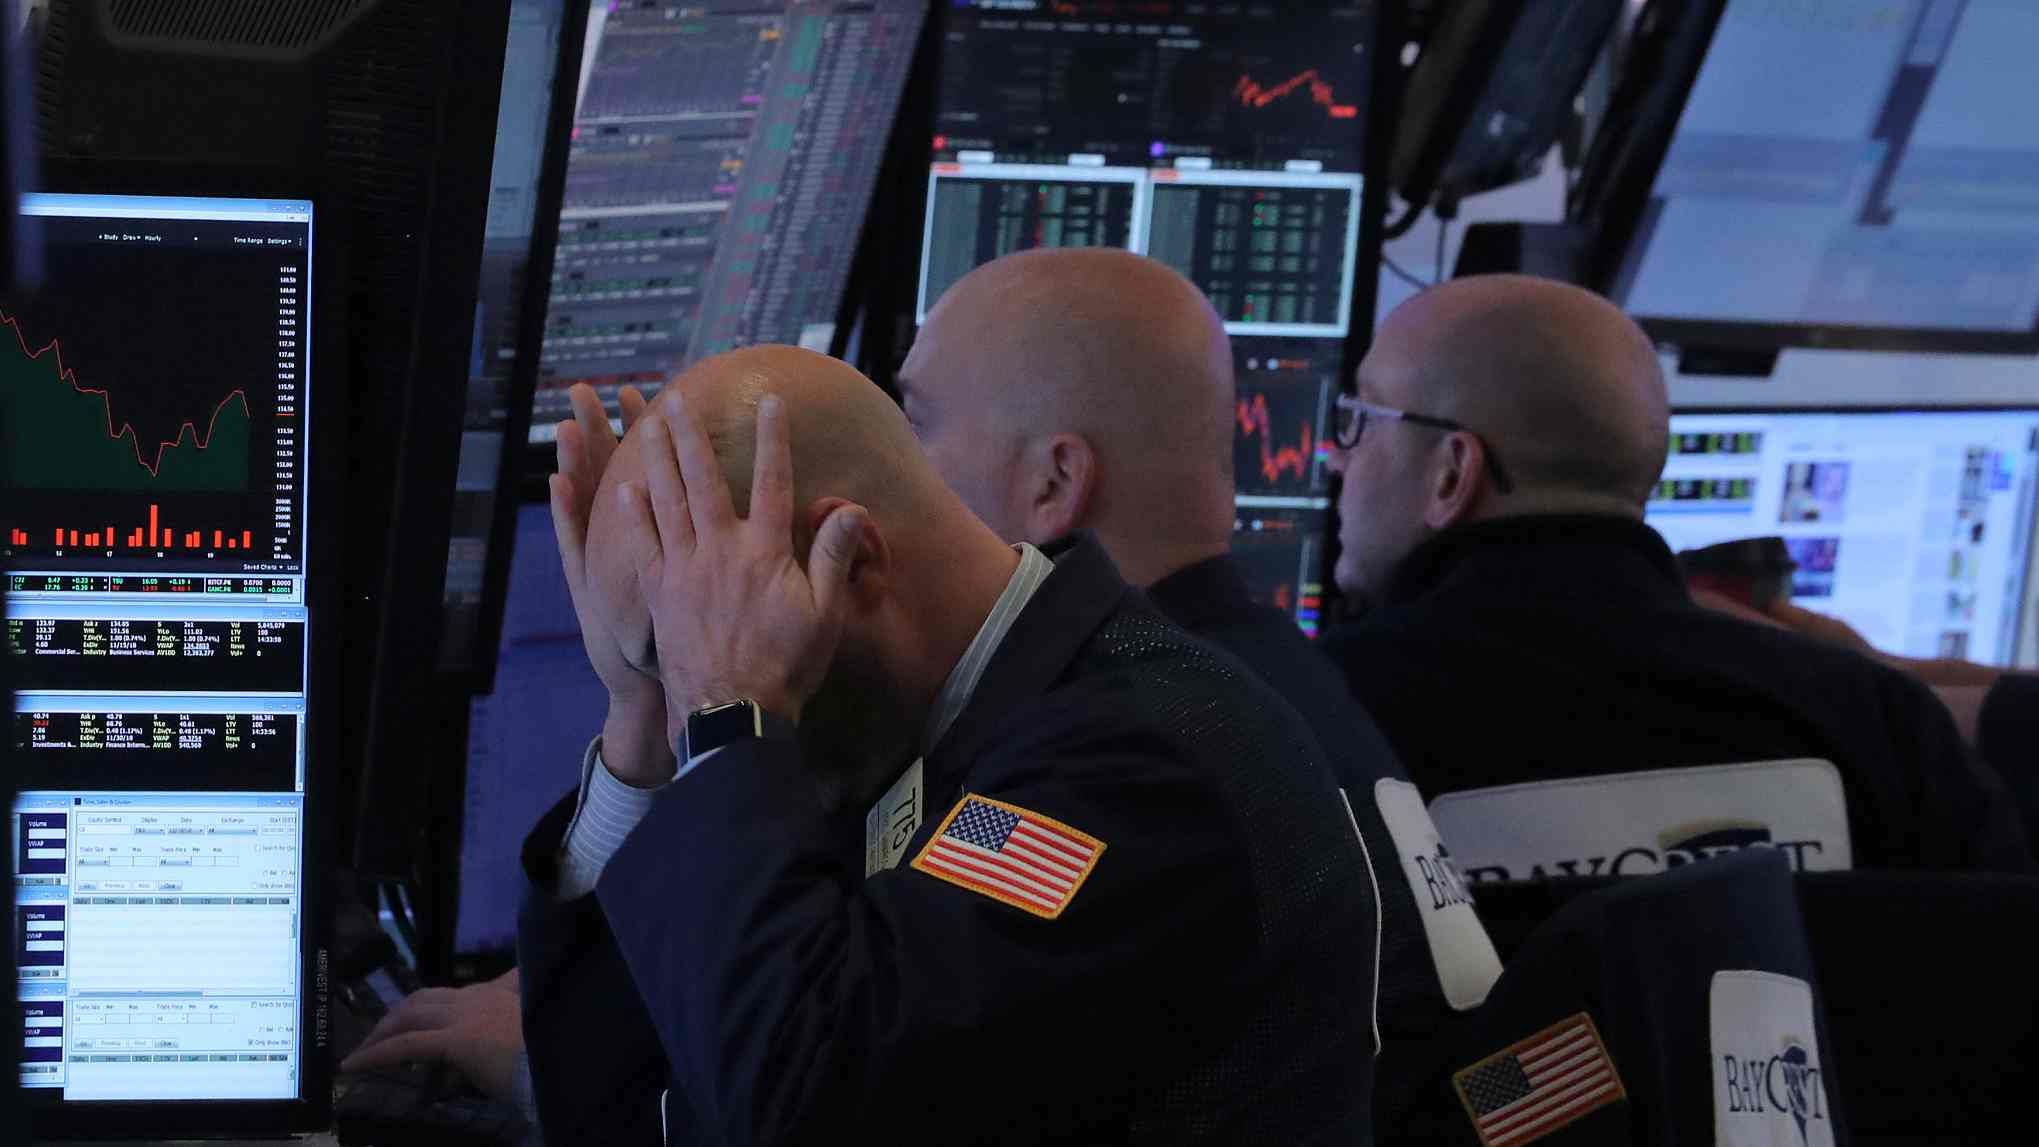 Wall Street stocks fell sharply in volatile trading on Friday, with the Nas...